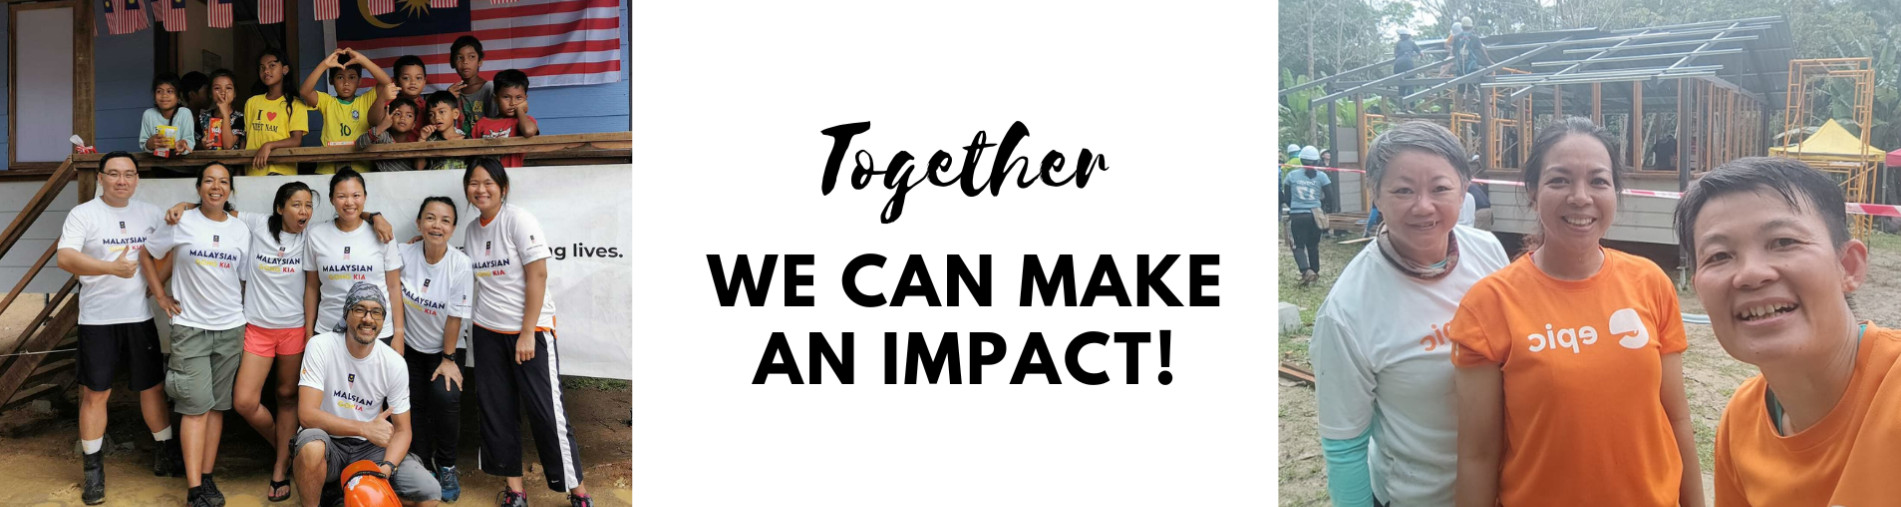 Together we can make an impact